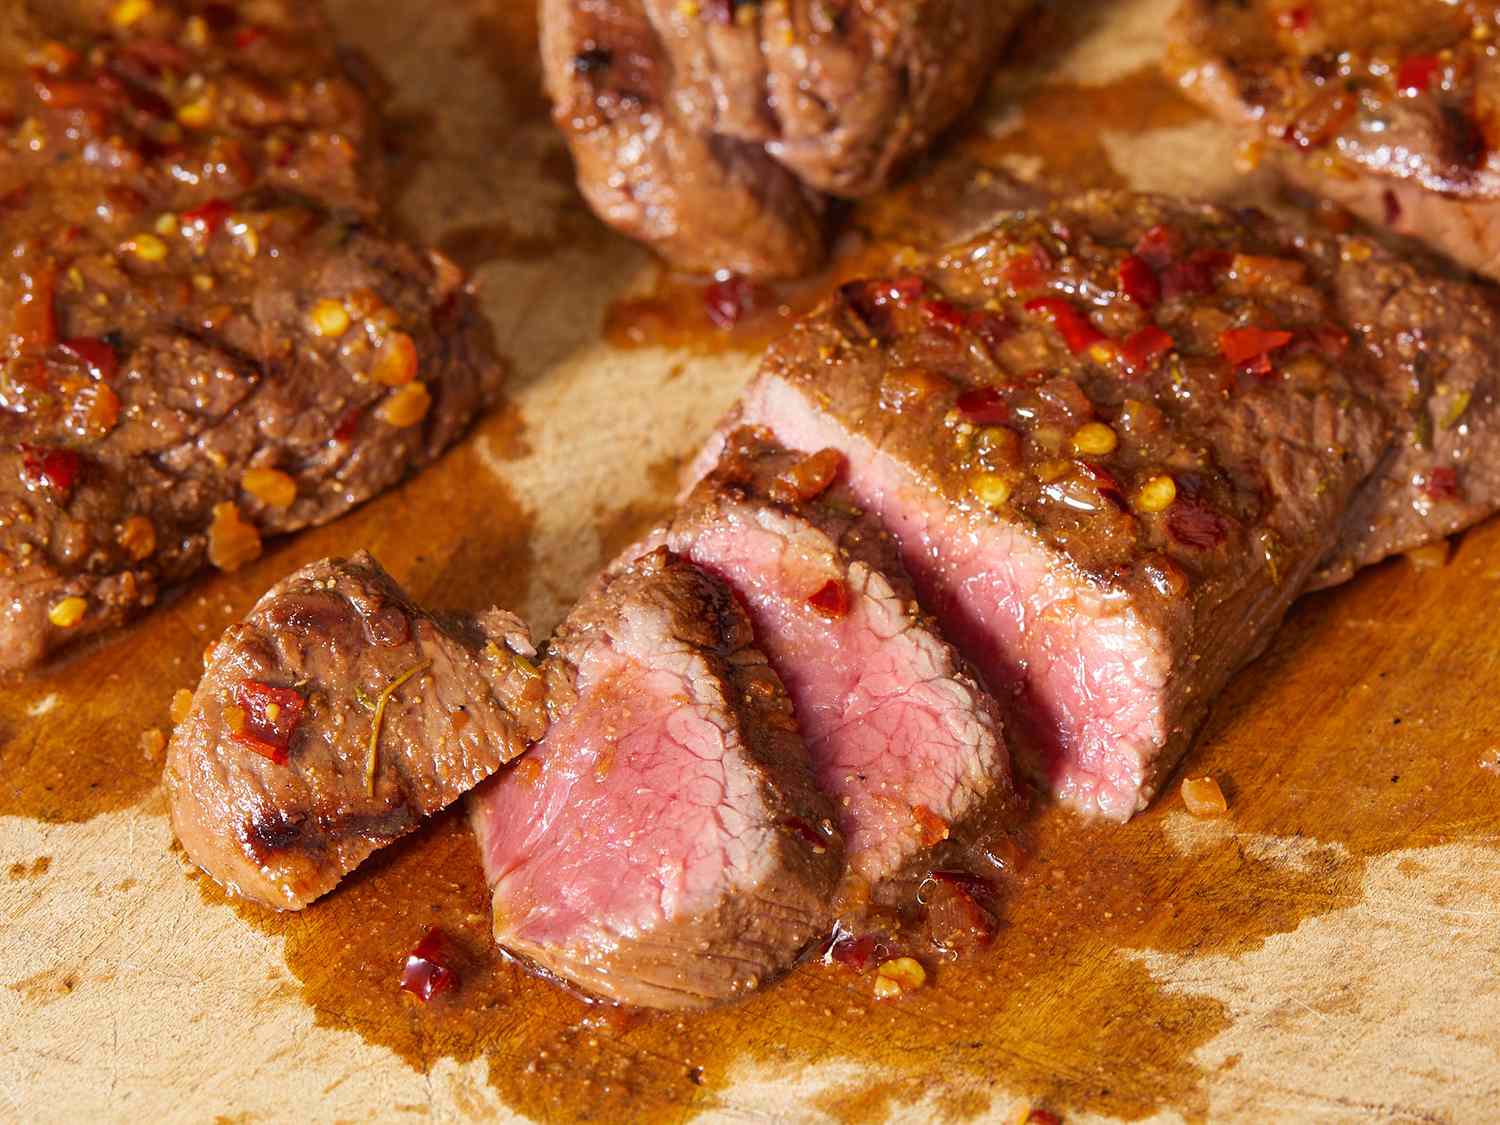 Close up on a half sliced marinated venison steak resting on a cutting board